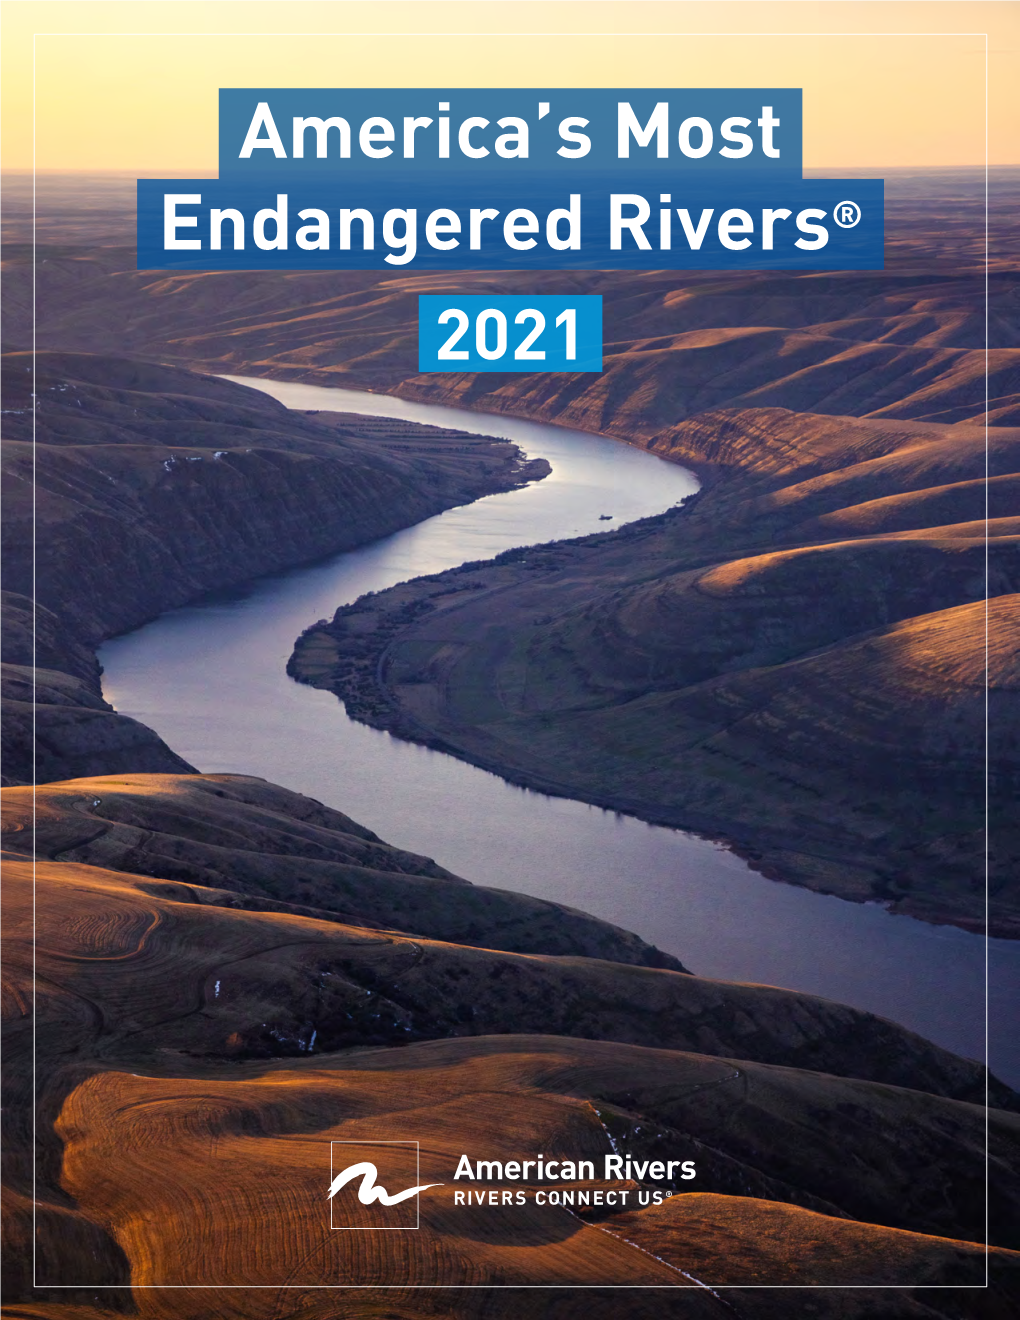 America's Most Endangered Rivers® 2021